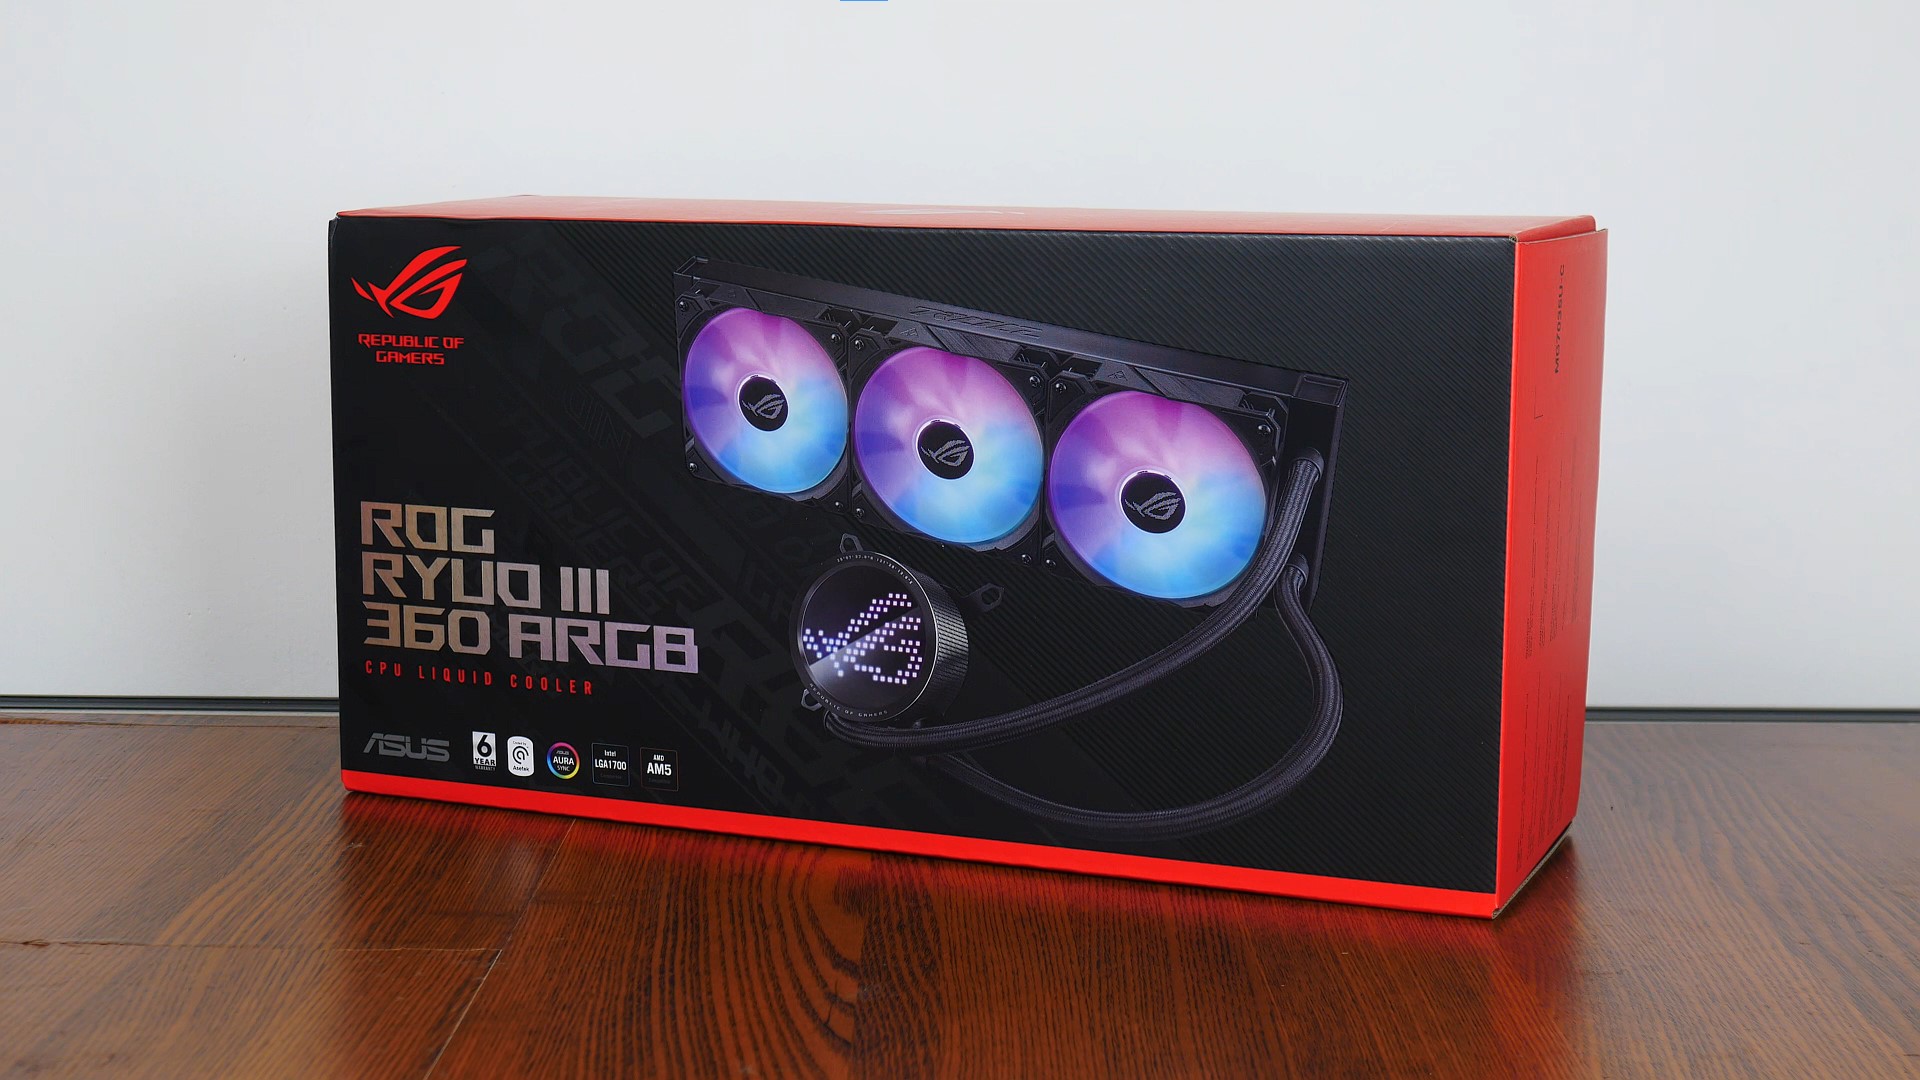 ASUS ROG RYUO III 360 Packaging (Front)